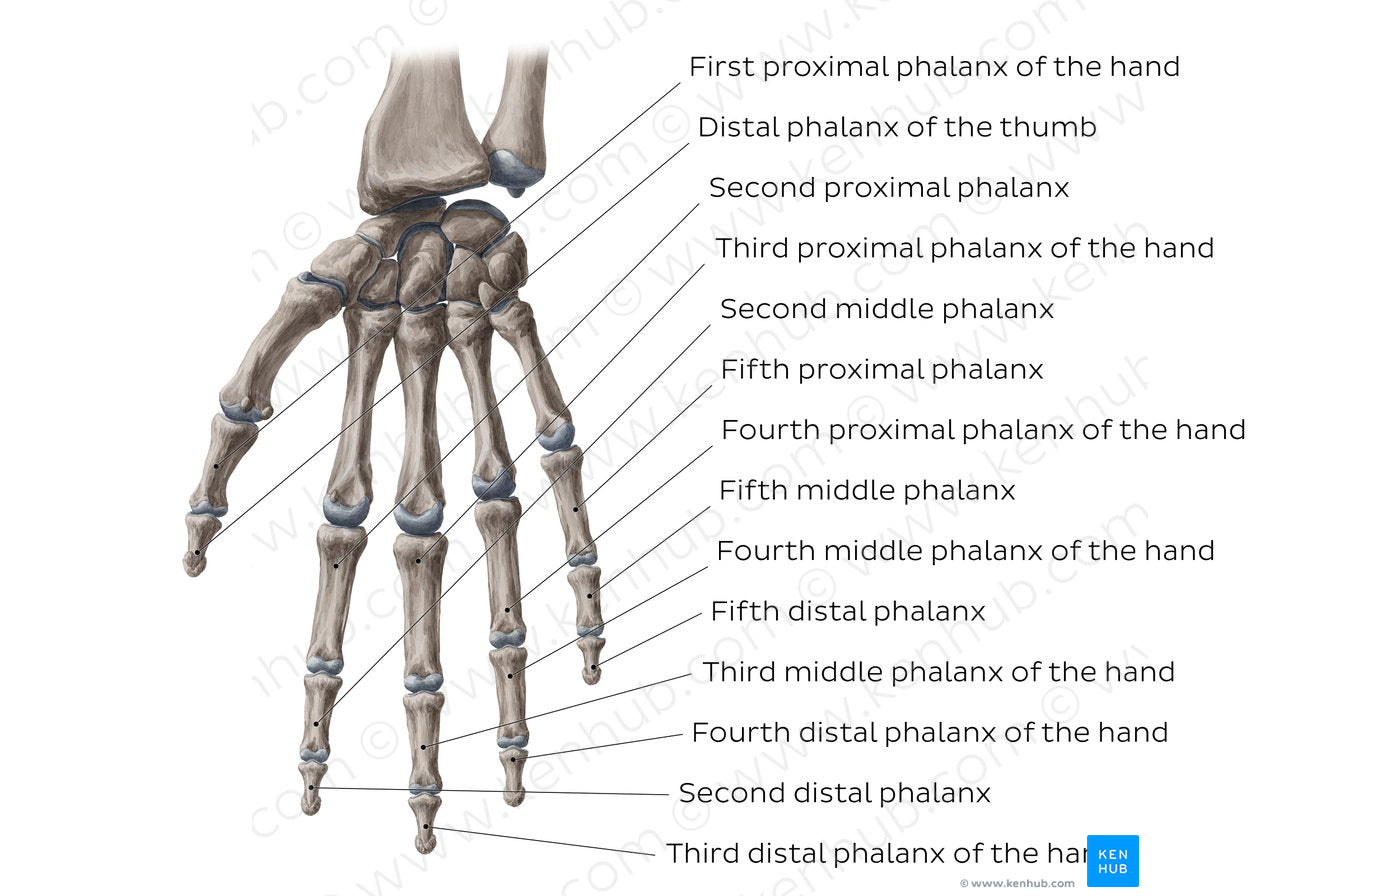 Phalanges of the hand (English)